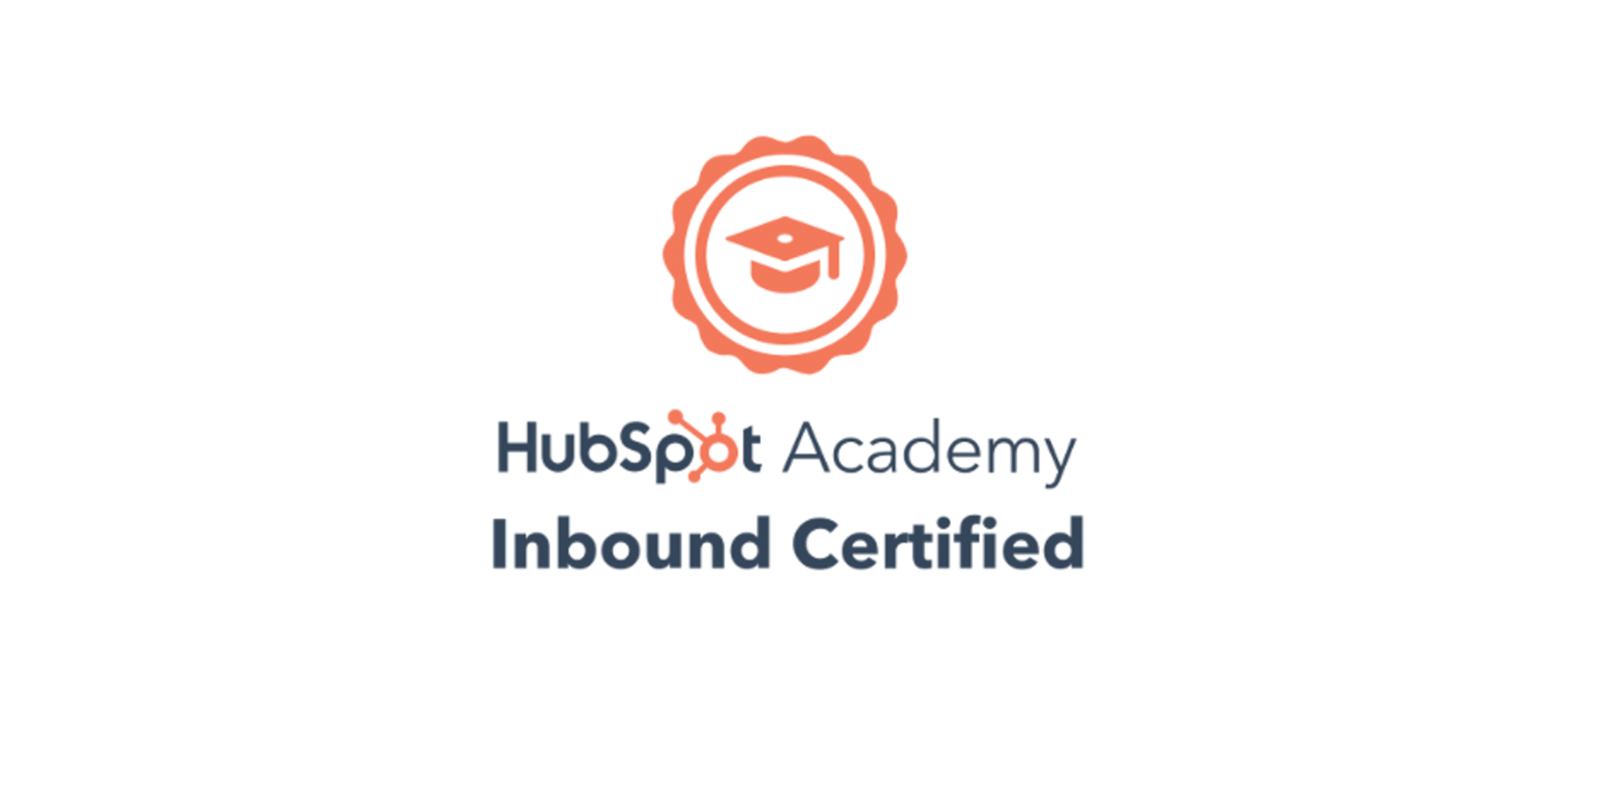 How to get your HubSpot Inbound Certification in South Africa